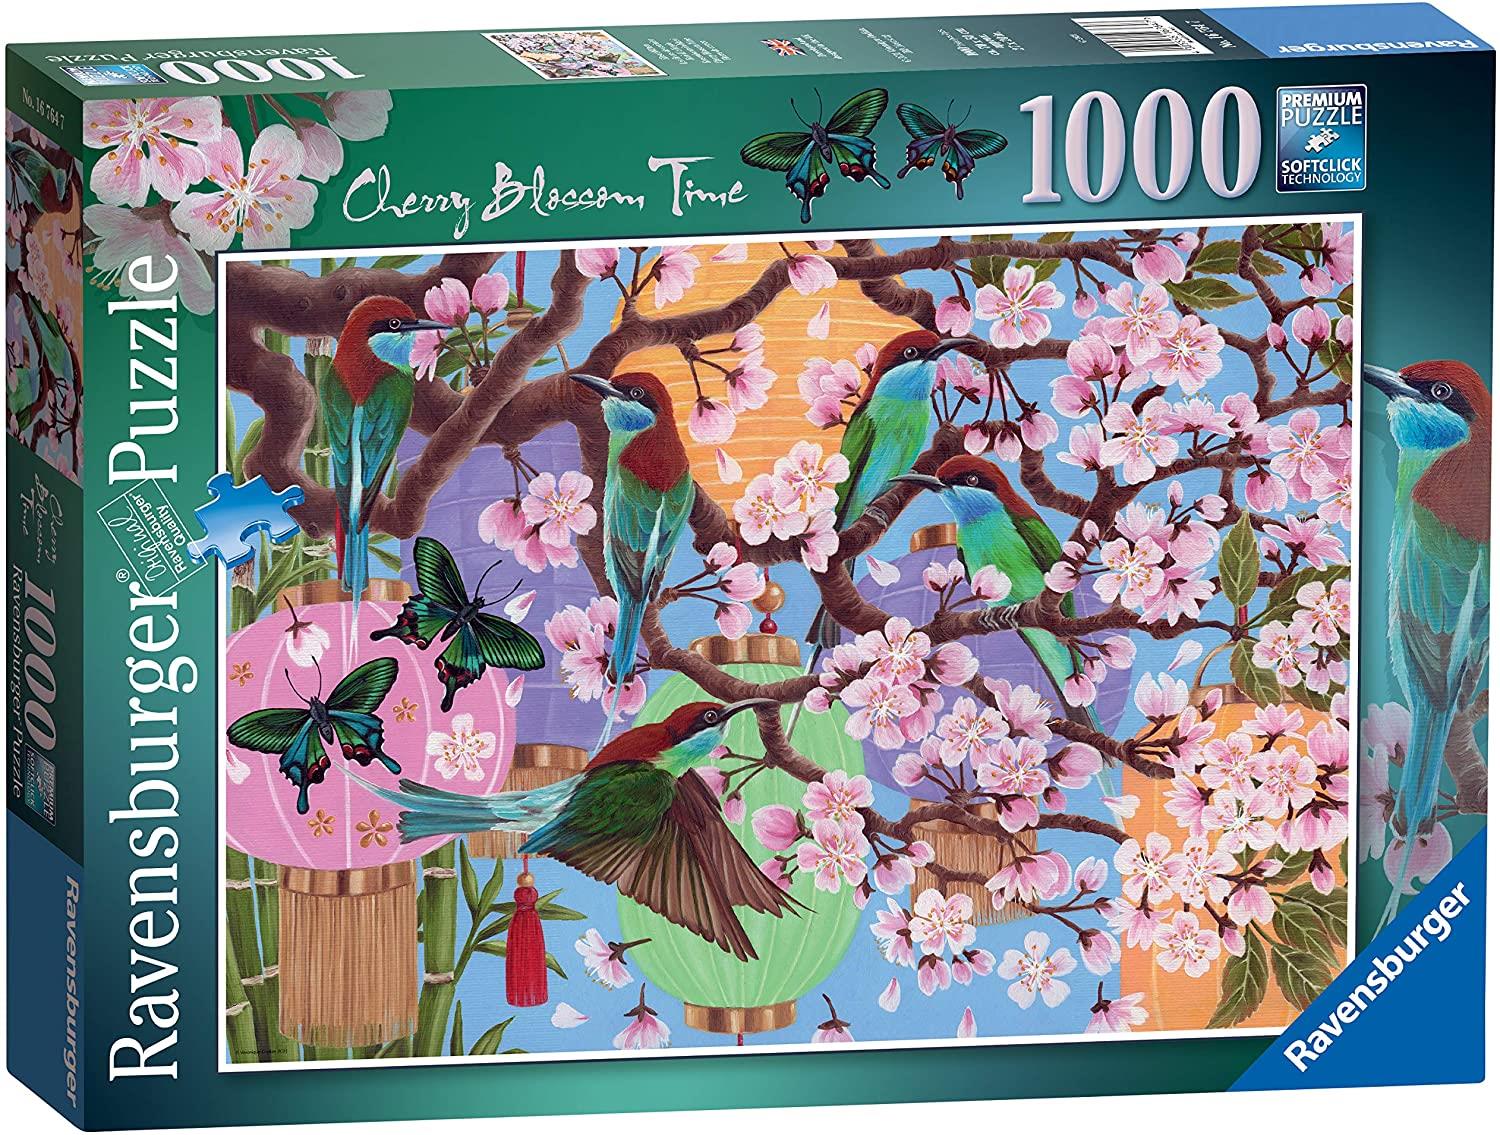 Ravensburger Cherry Blossom Time Jigsaw Puzzle (1000 Pieces ...